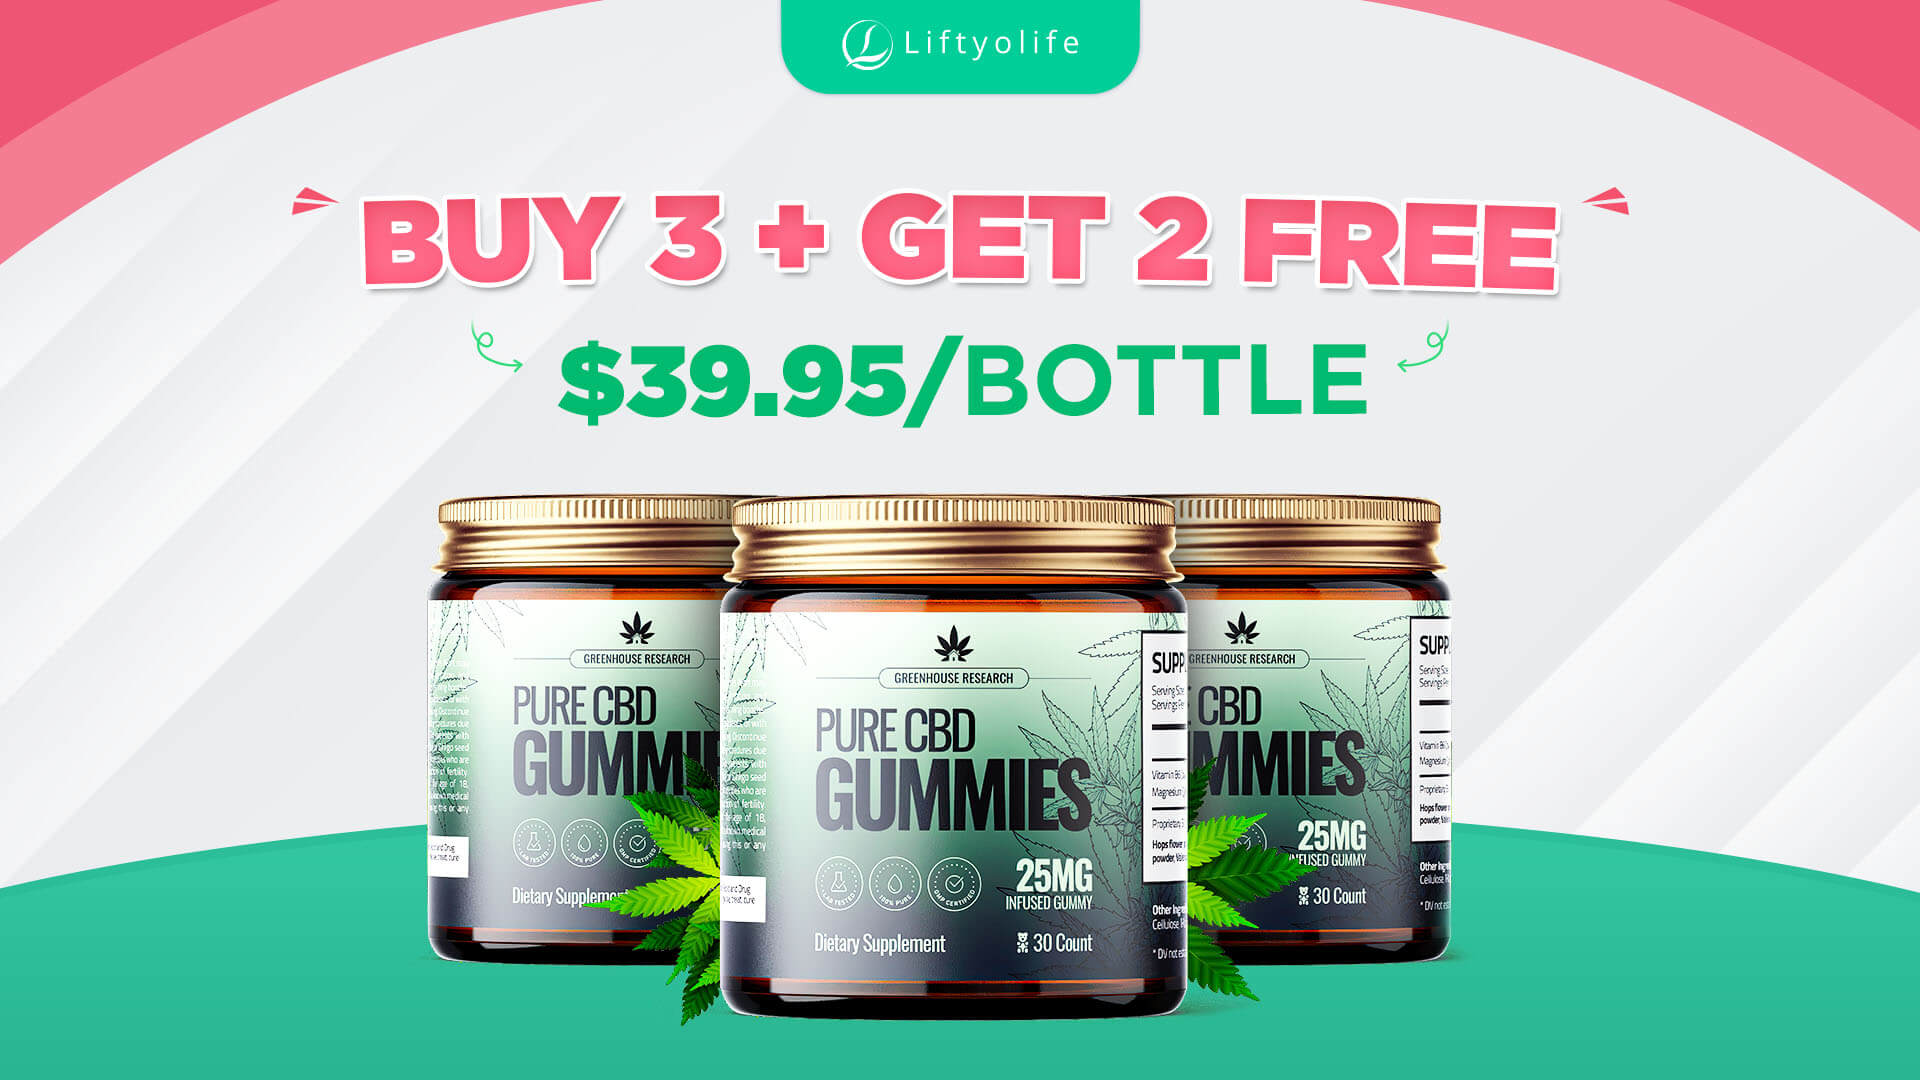 What Is The Price Of Greenhouse Pure CBD Gummies?